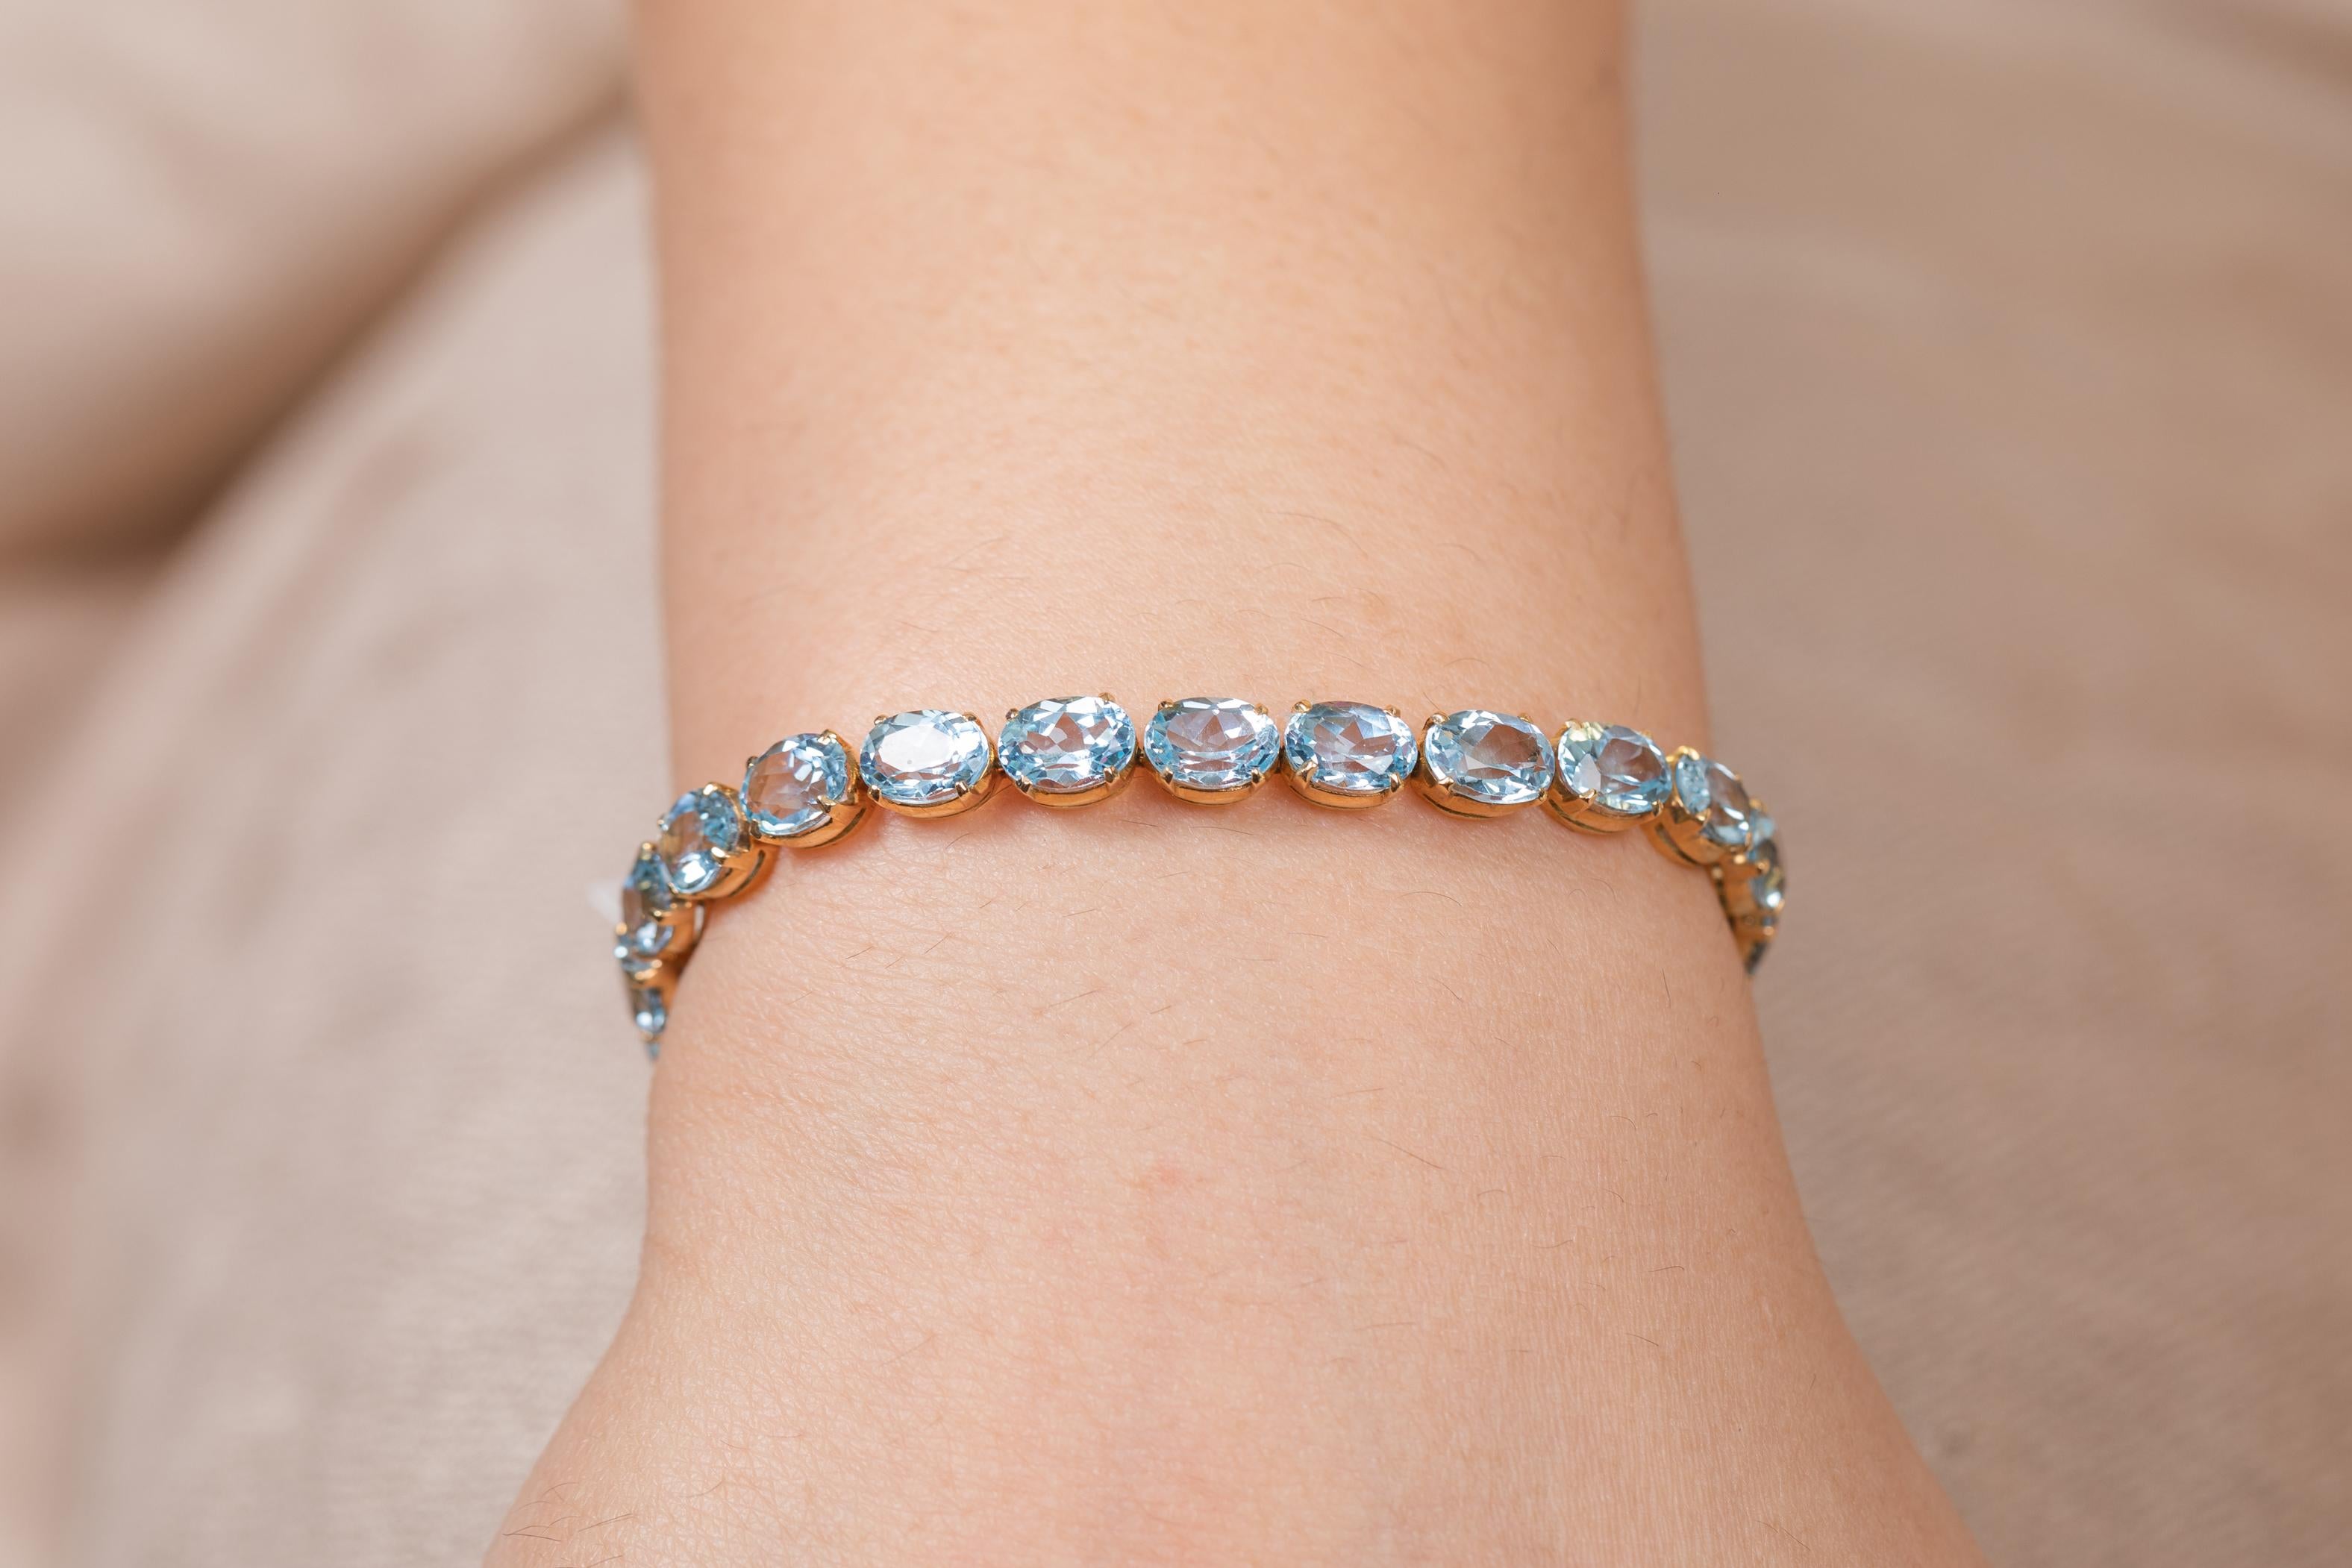 This Sparkling Blue Topaz Tennis Bracelet in 18K gold showcases 25 endlessly sparkling natural blue topaz, weighing 28.5 carats. It measures 7.5 inches long in length. 
Blue topaz helps to improve communication and self expression. 
Designed with